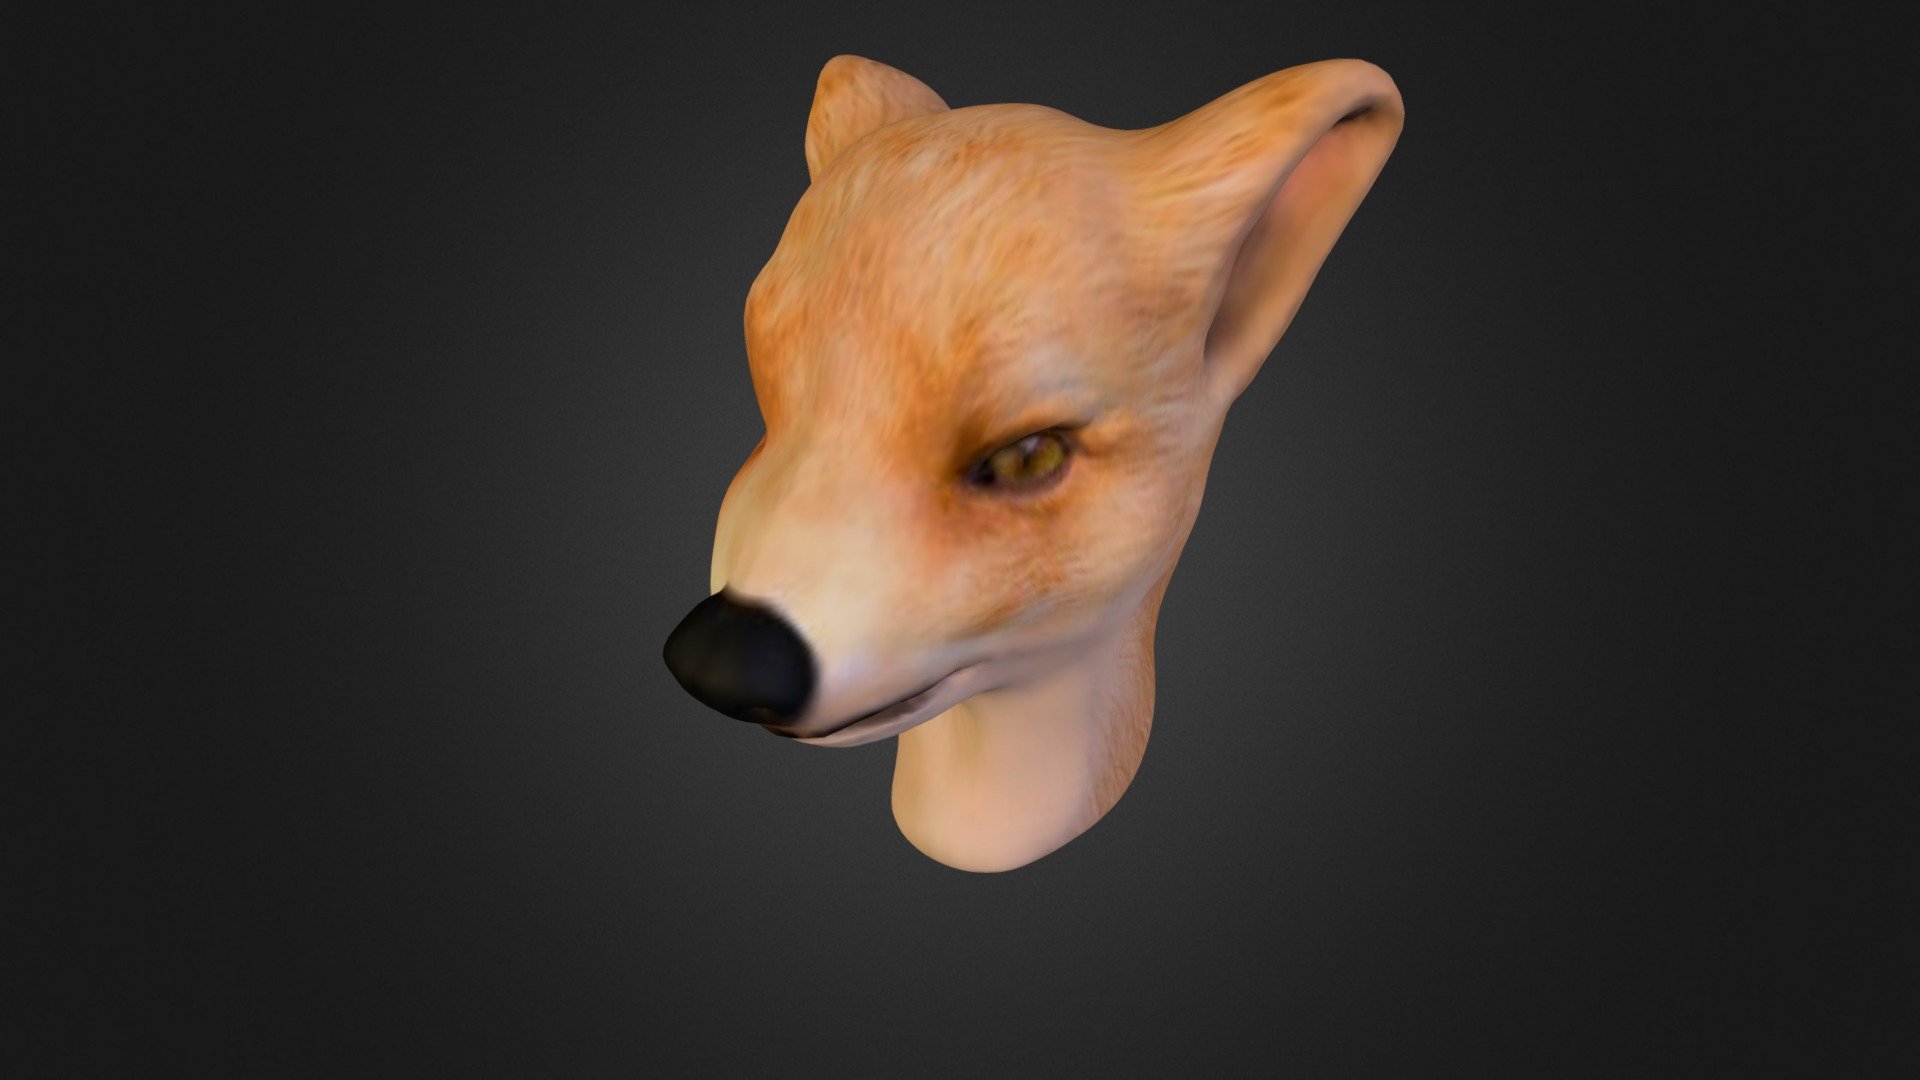 3rd try for the dog´s head
like it more, using photo for texturing - Dog Head Fox Test 003 - 3D model by Mario Vera (@maveca22) 3d model